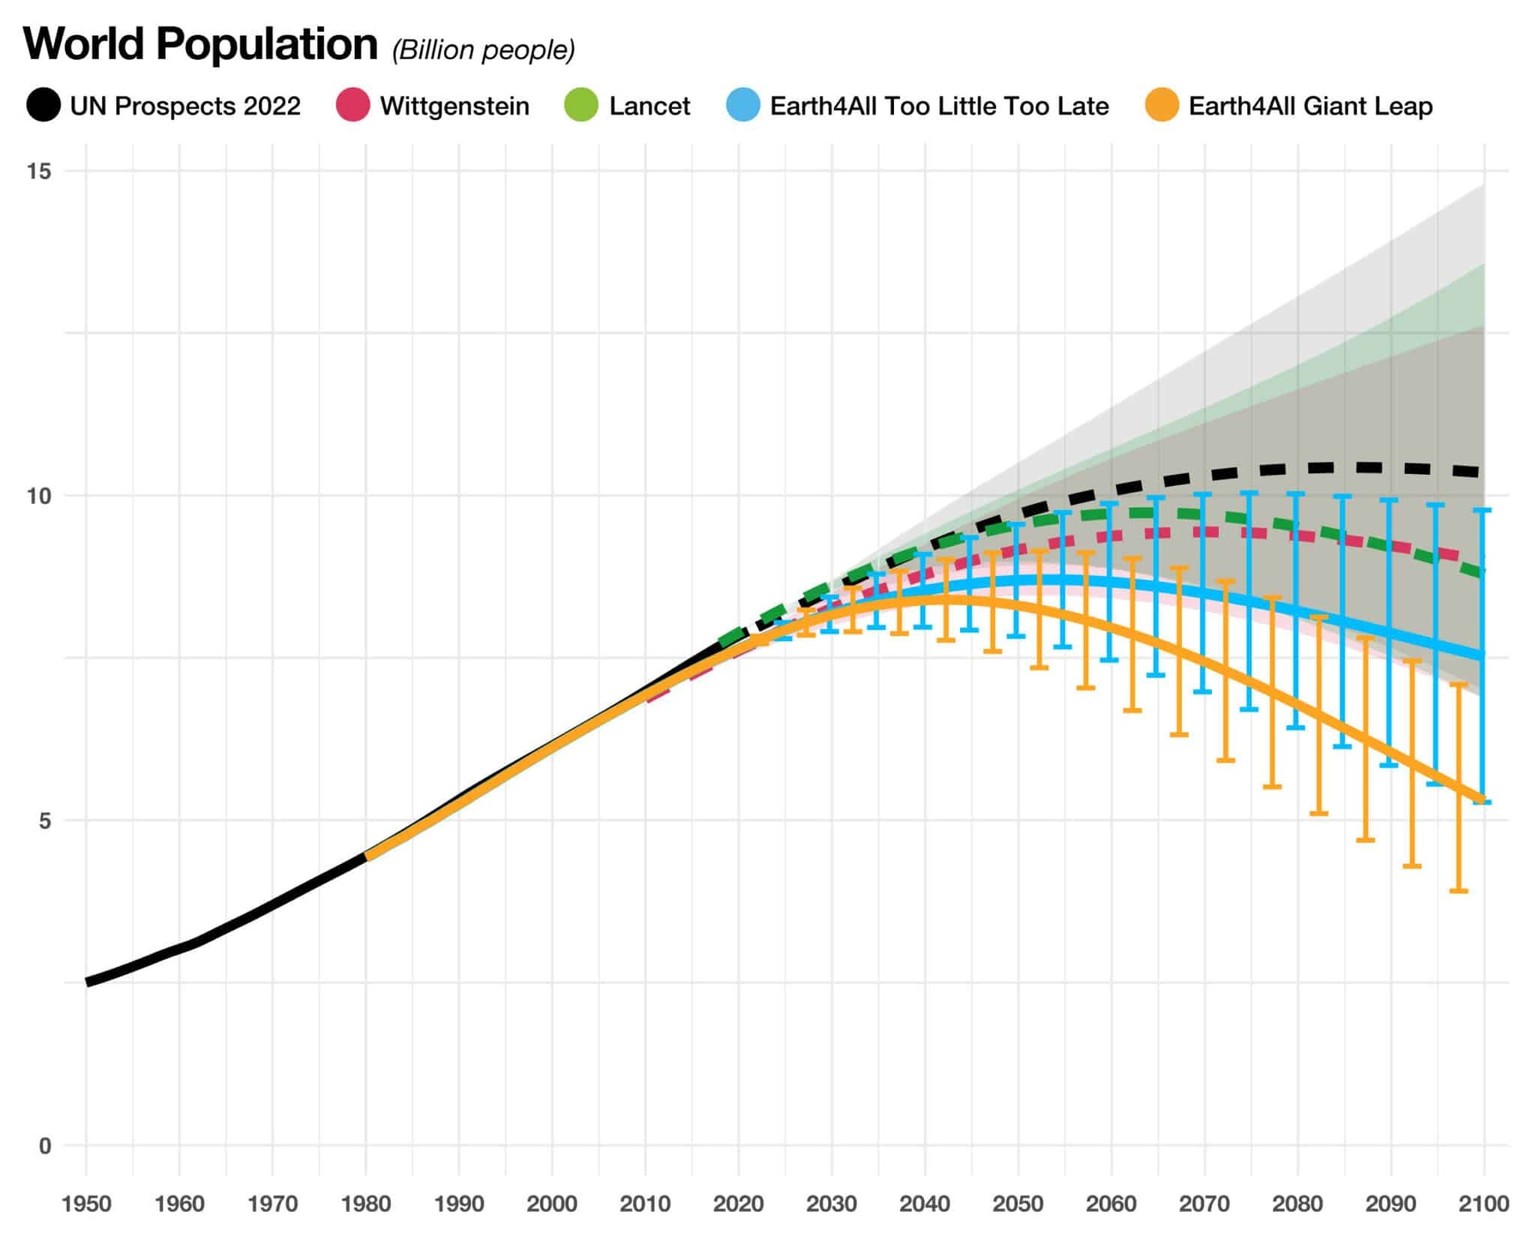 Comparing five population scenarios to 2100 (United Nations, Wittgenstein, Lancet, Earth4All – Too Little Too Late, Earth4All – Giant Leap).
https://static1.squarespace.com/static/6253f8f13c707724ac00 ...